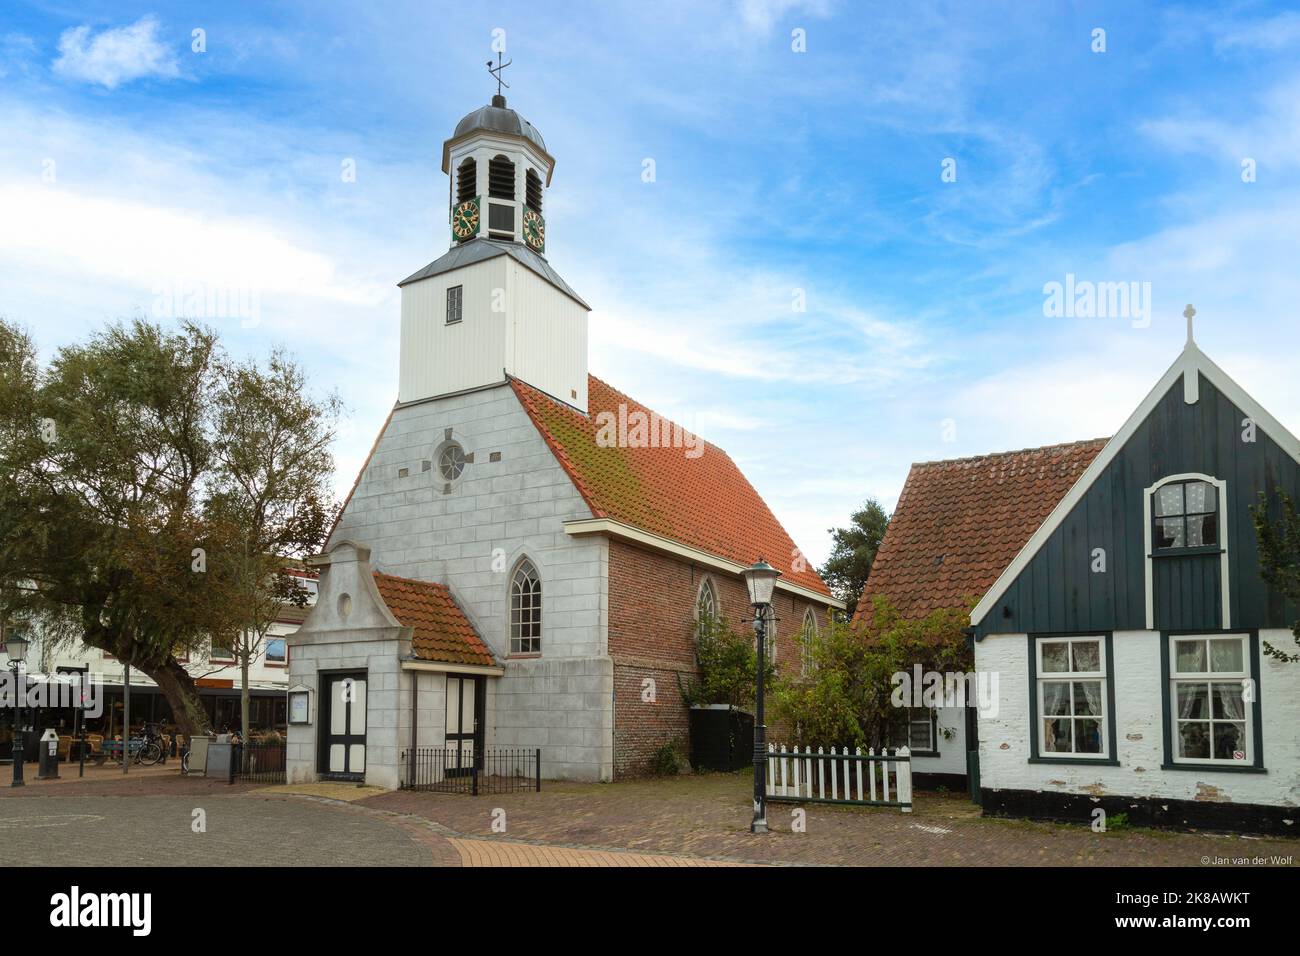 Reformed church in the center of the small touristic village De Koog on the Wadden Island of Texel, the Netherlands. Stock Photo